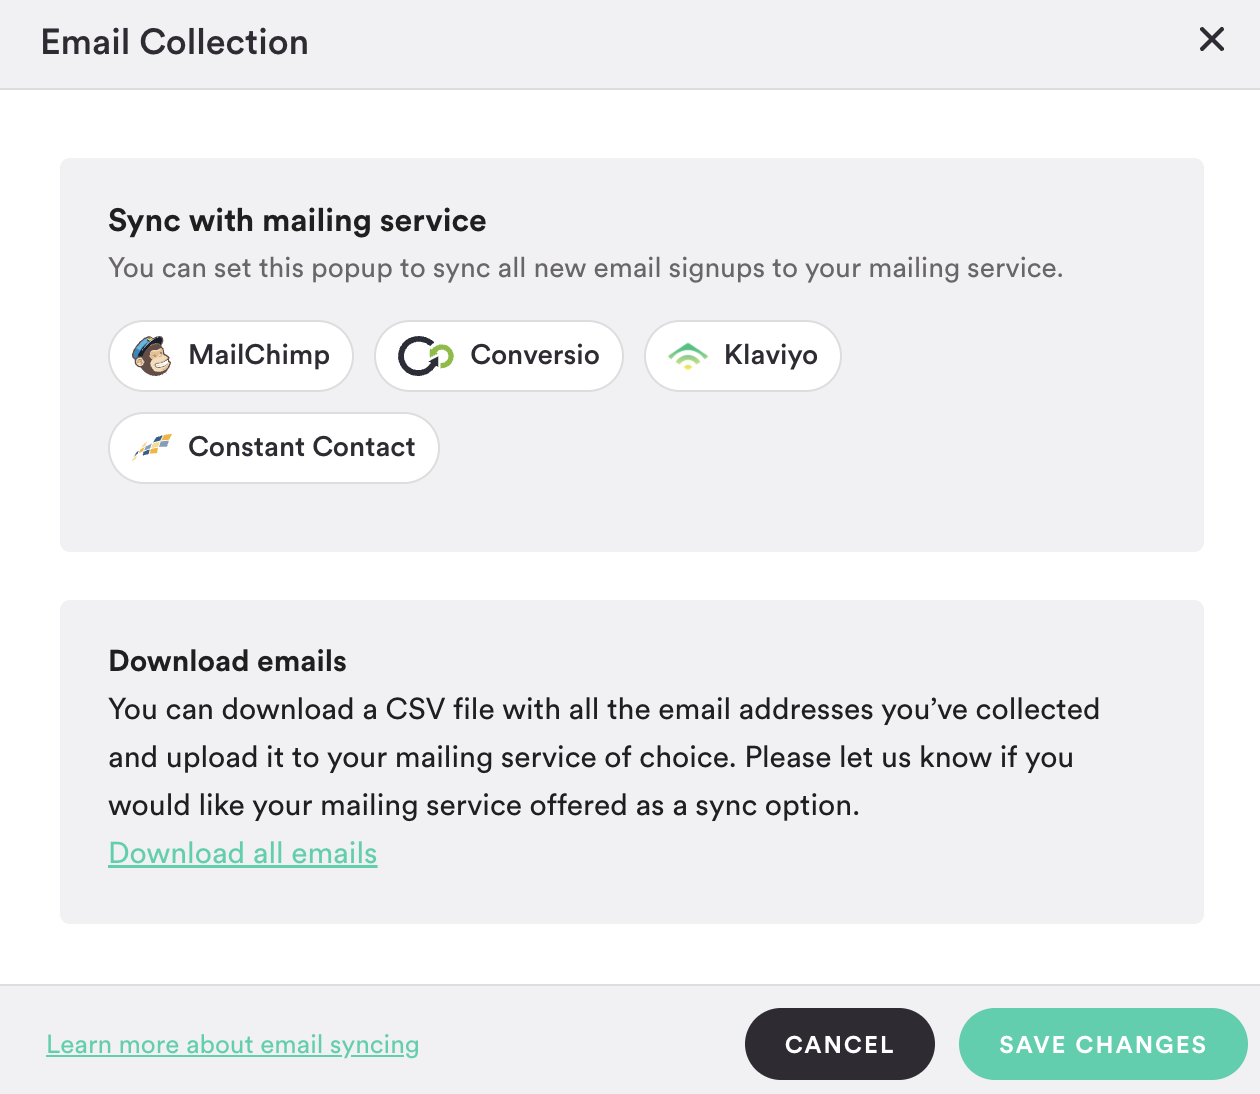 Email Collection settings where Constant Contact can be selected from a list of mailing services.